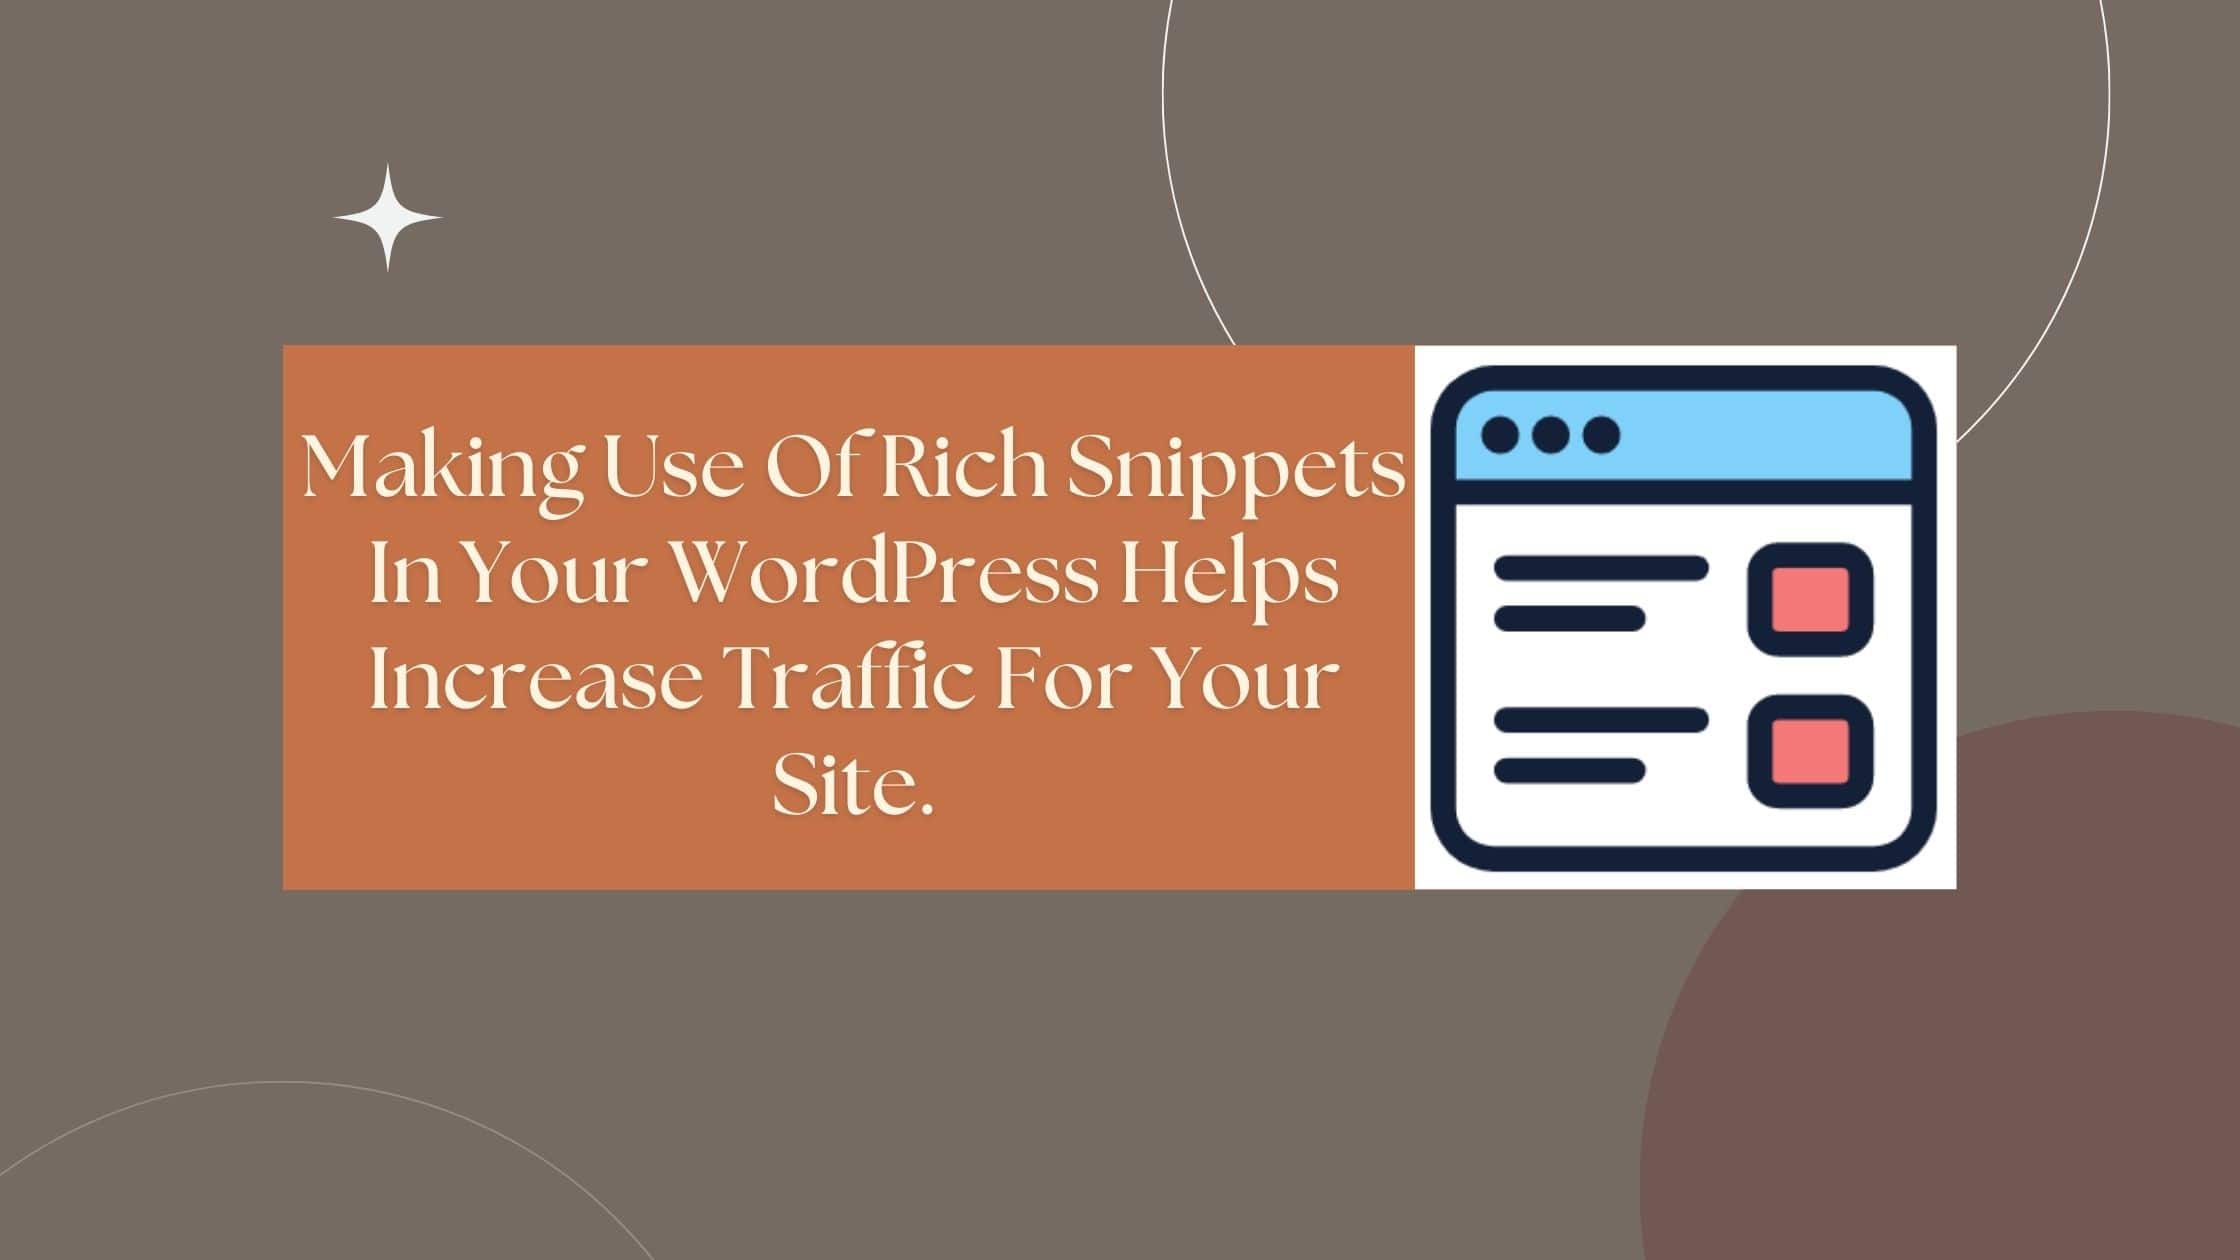 Making Use Of Rich Snippets In Your WordPress Helps Increase Traffic For Your Site.